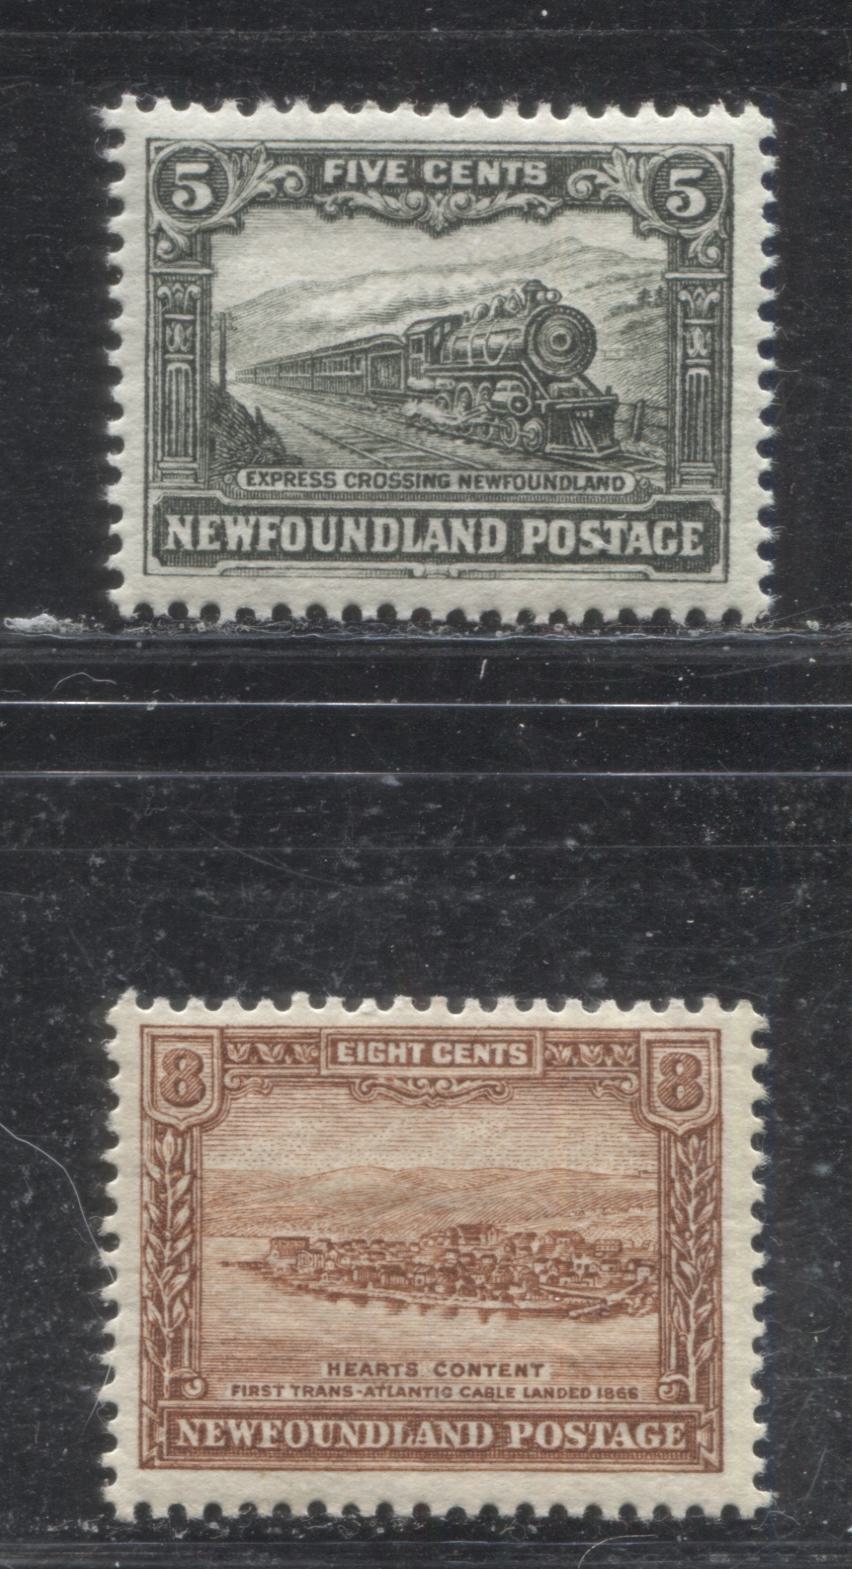 Lot 89 Newfoundland # 176, 178 5c & 8c Slate Green & Deep Orange Brown Express Crossing - Heart's Content, 1931-1932 Watermarked Publicity Issue, Two Fine OG and VFOG Examples, Comb Perf. 13.7 x 14 and 13.8